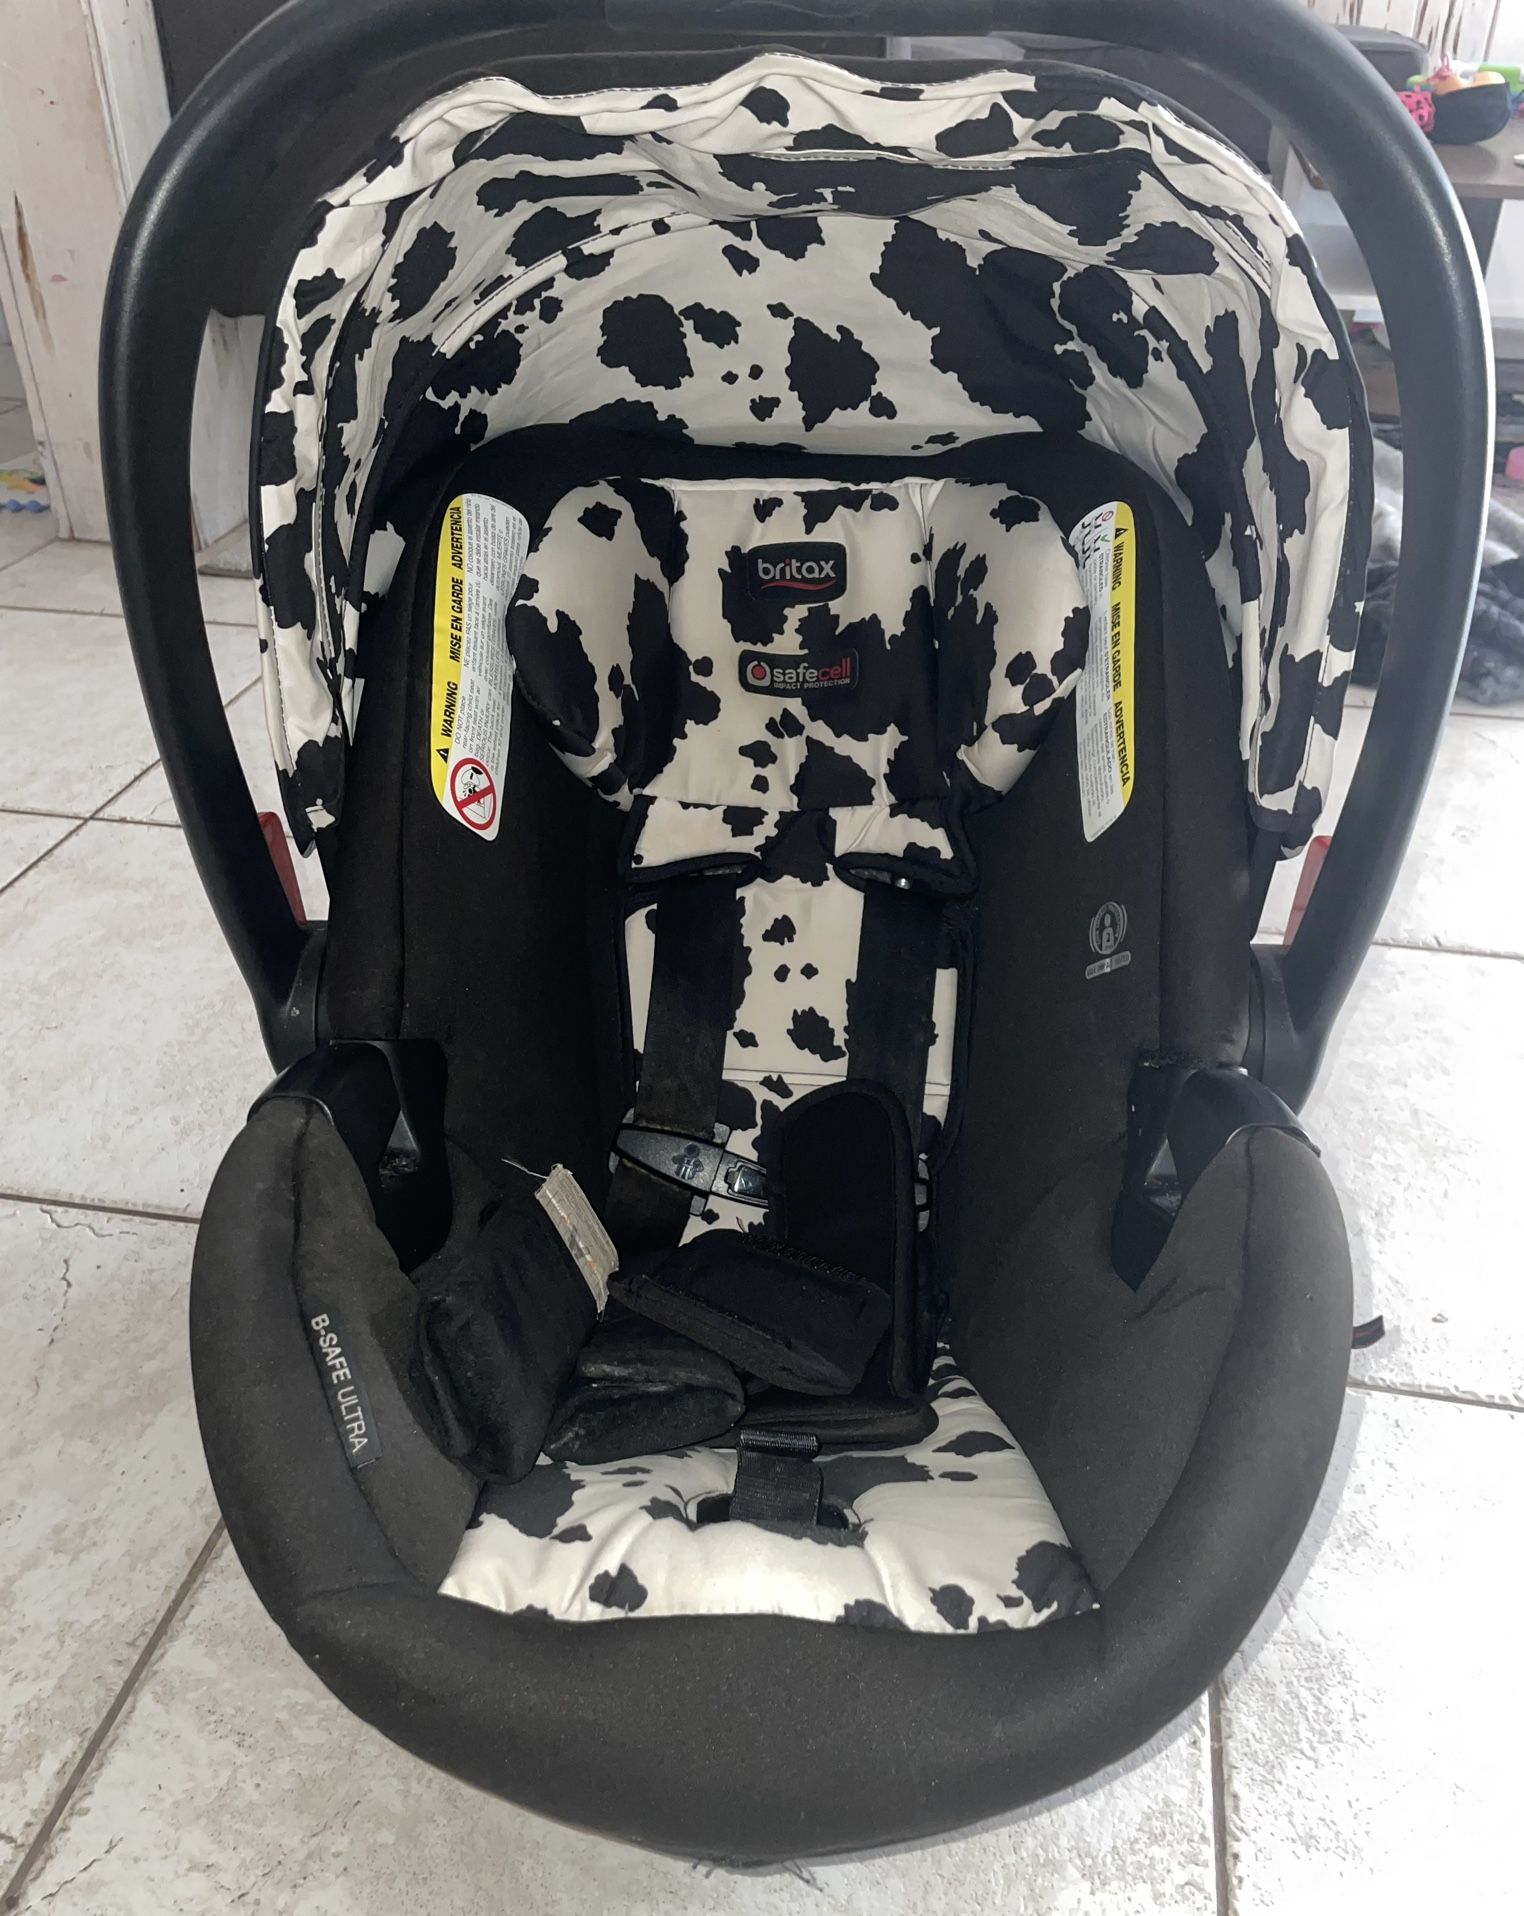 Britax Cowmooflage Travel System Includes Infant Car seat And Base And Stroller